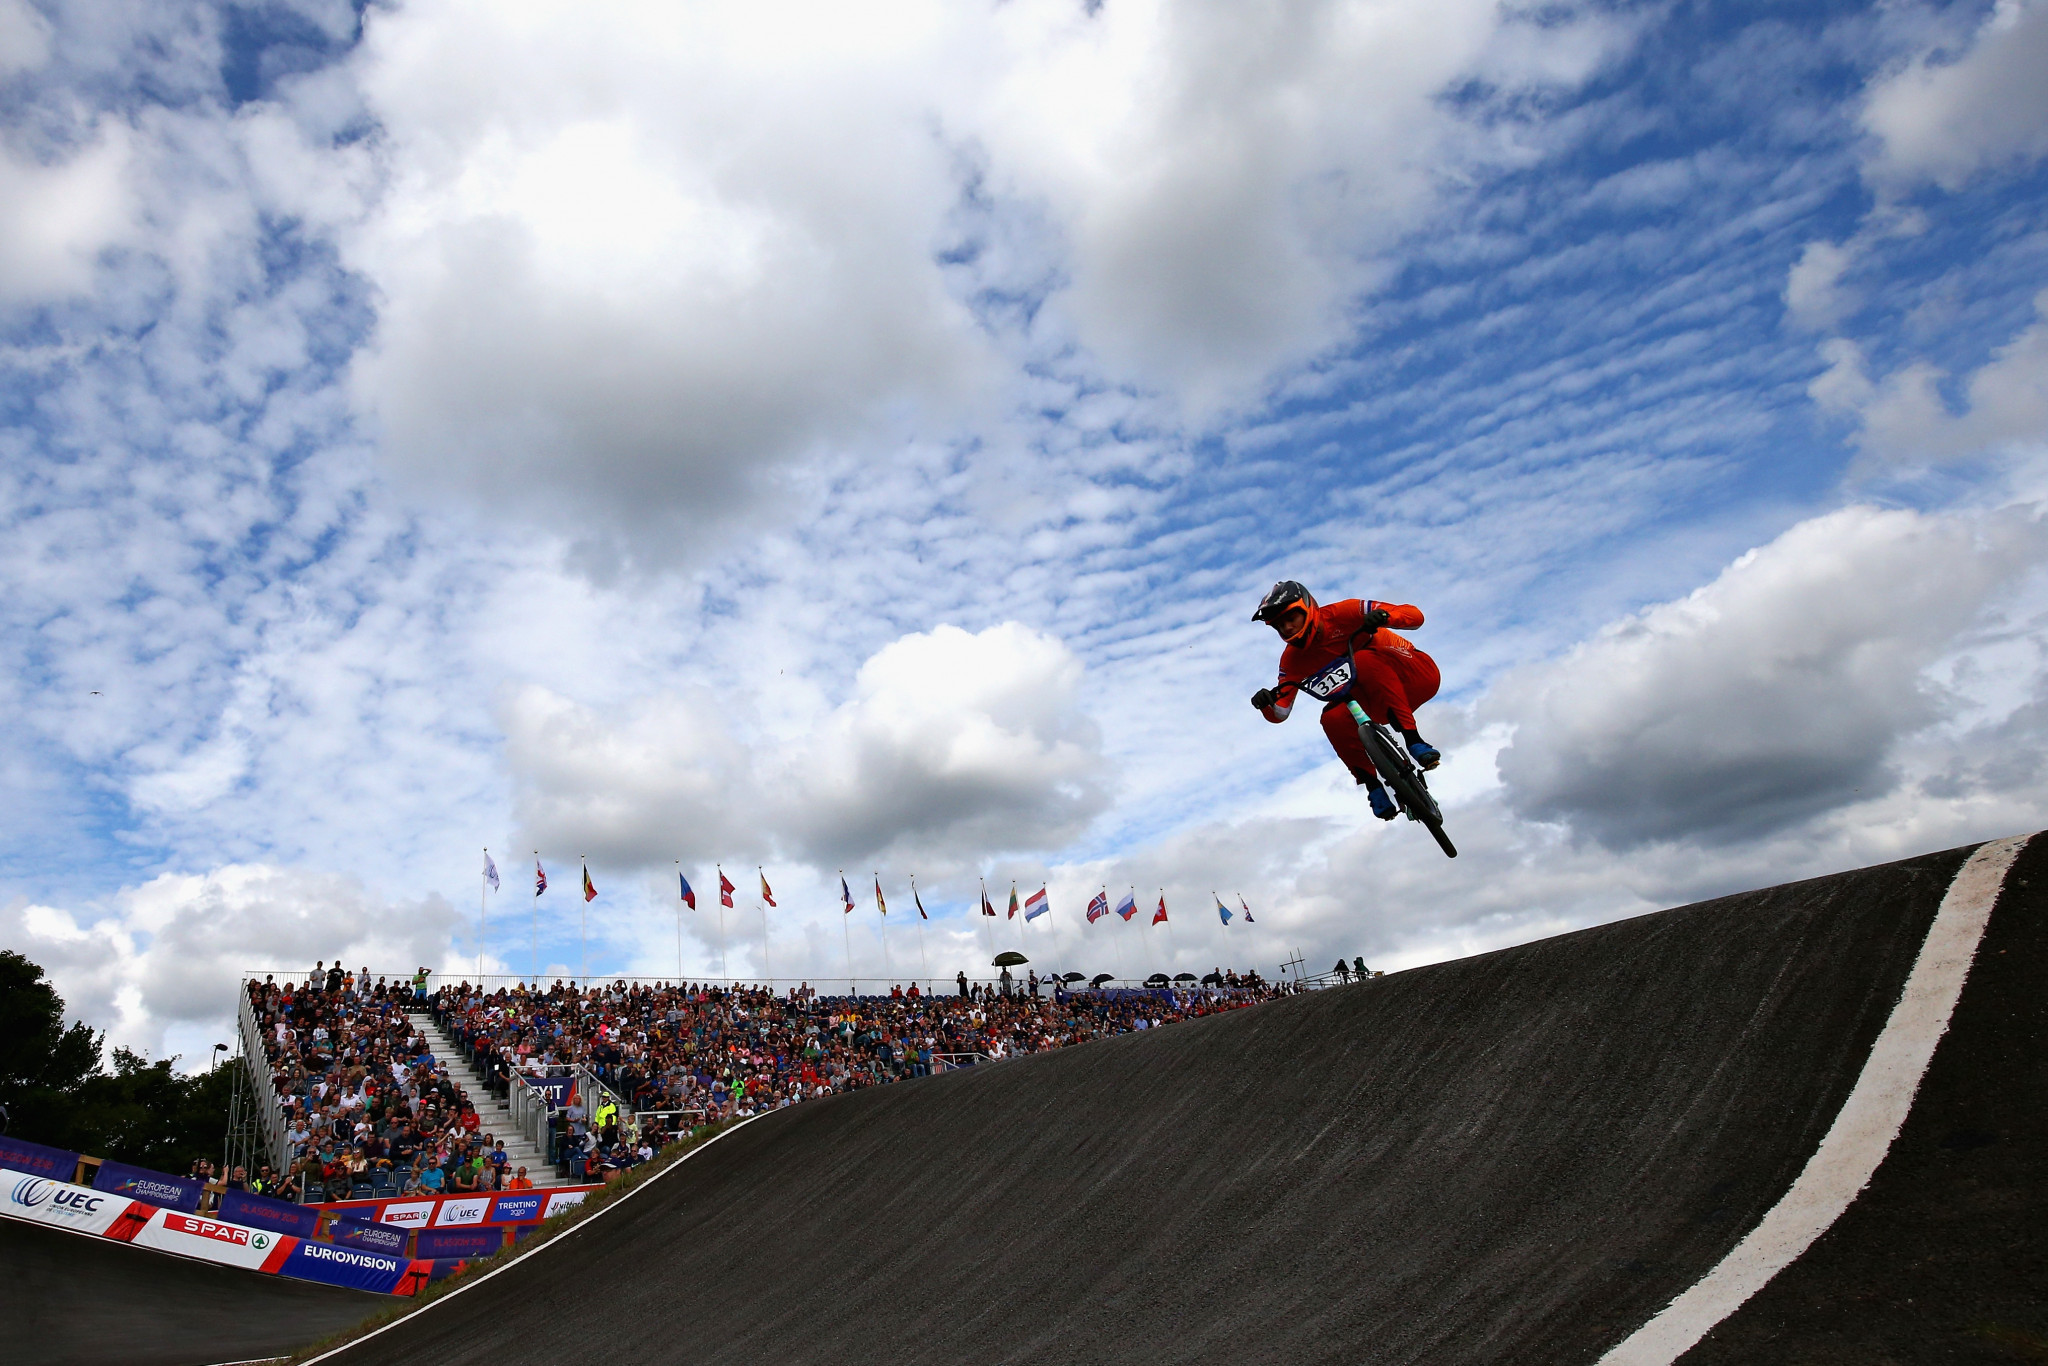 The Netherlands' Niek Kimmann is among the names to look out for in the men's competition at the UCI BMX Supercross World Cup in Manchester this weekend ©Getty Images